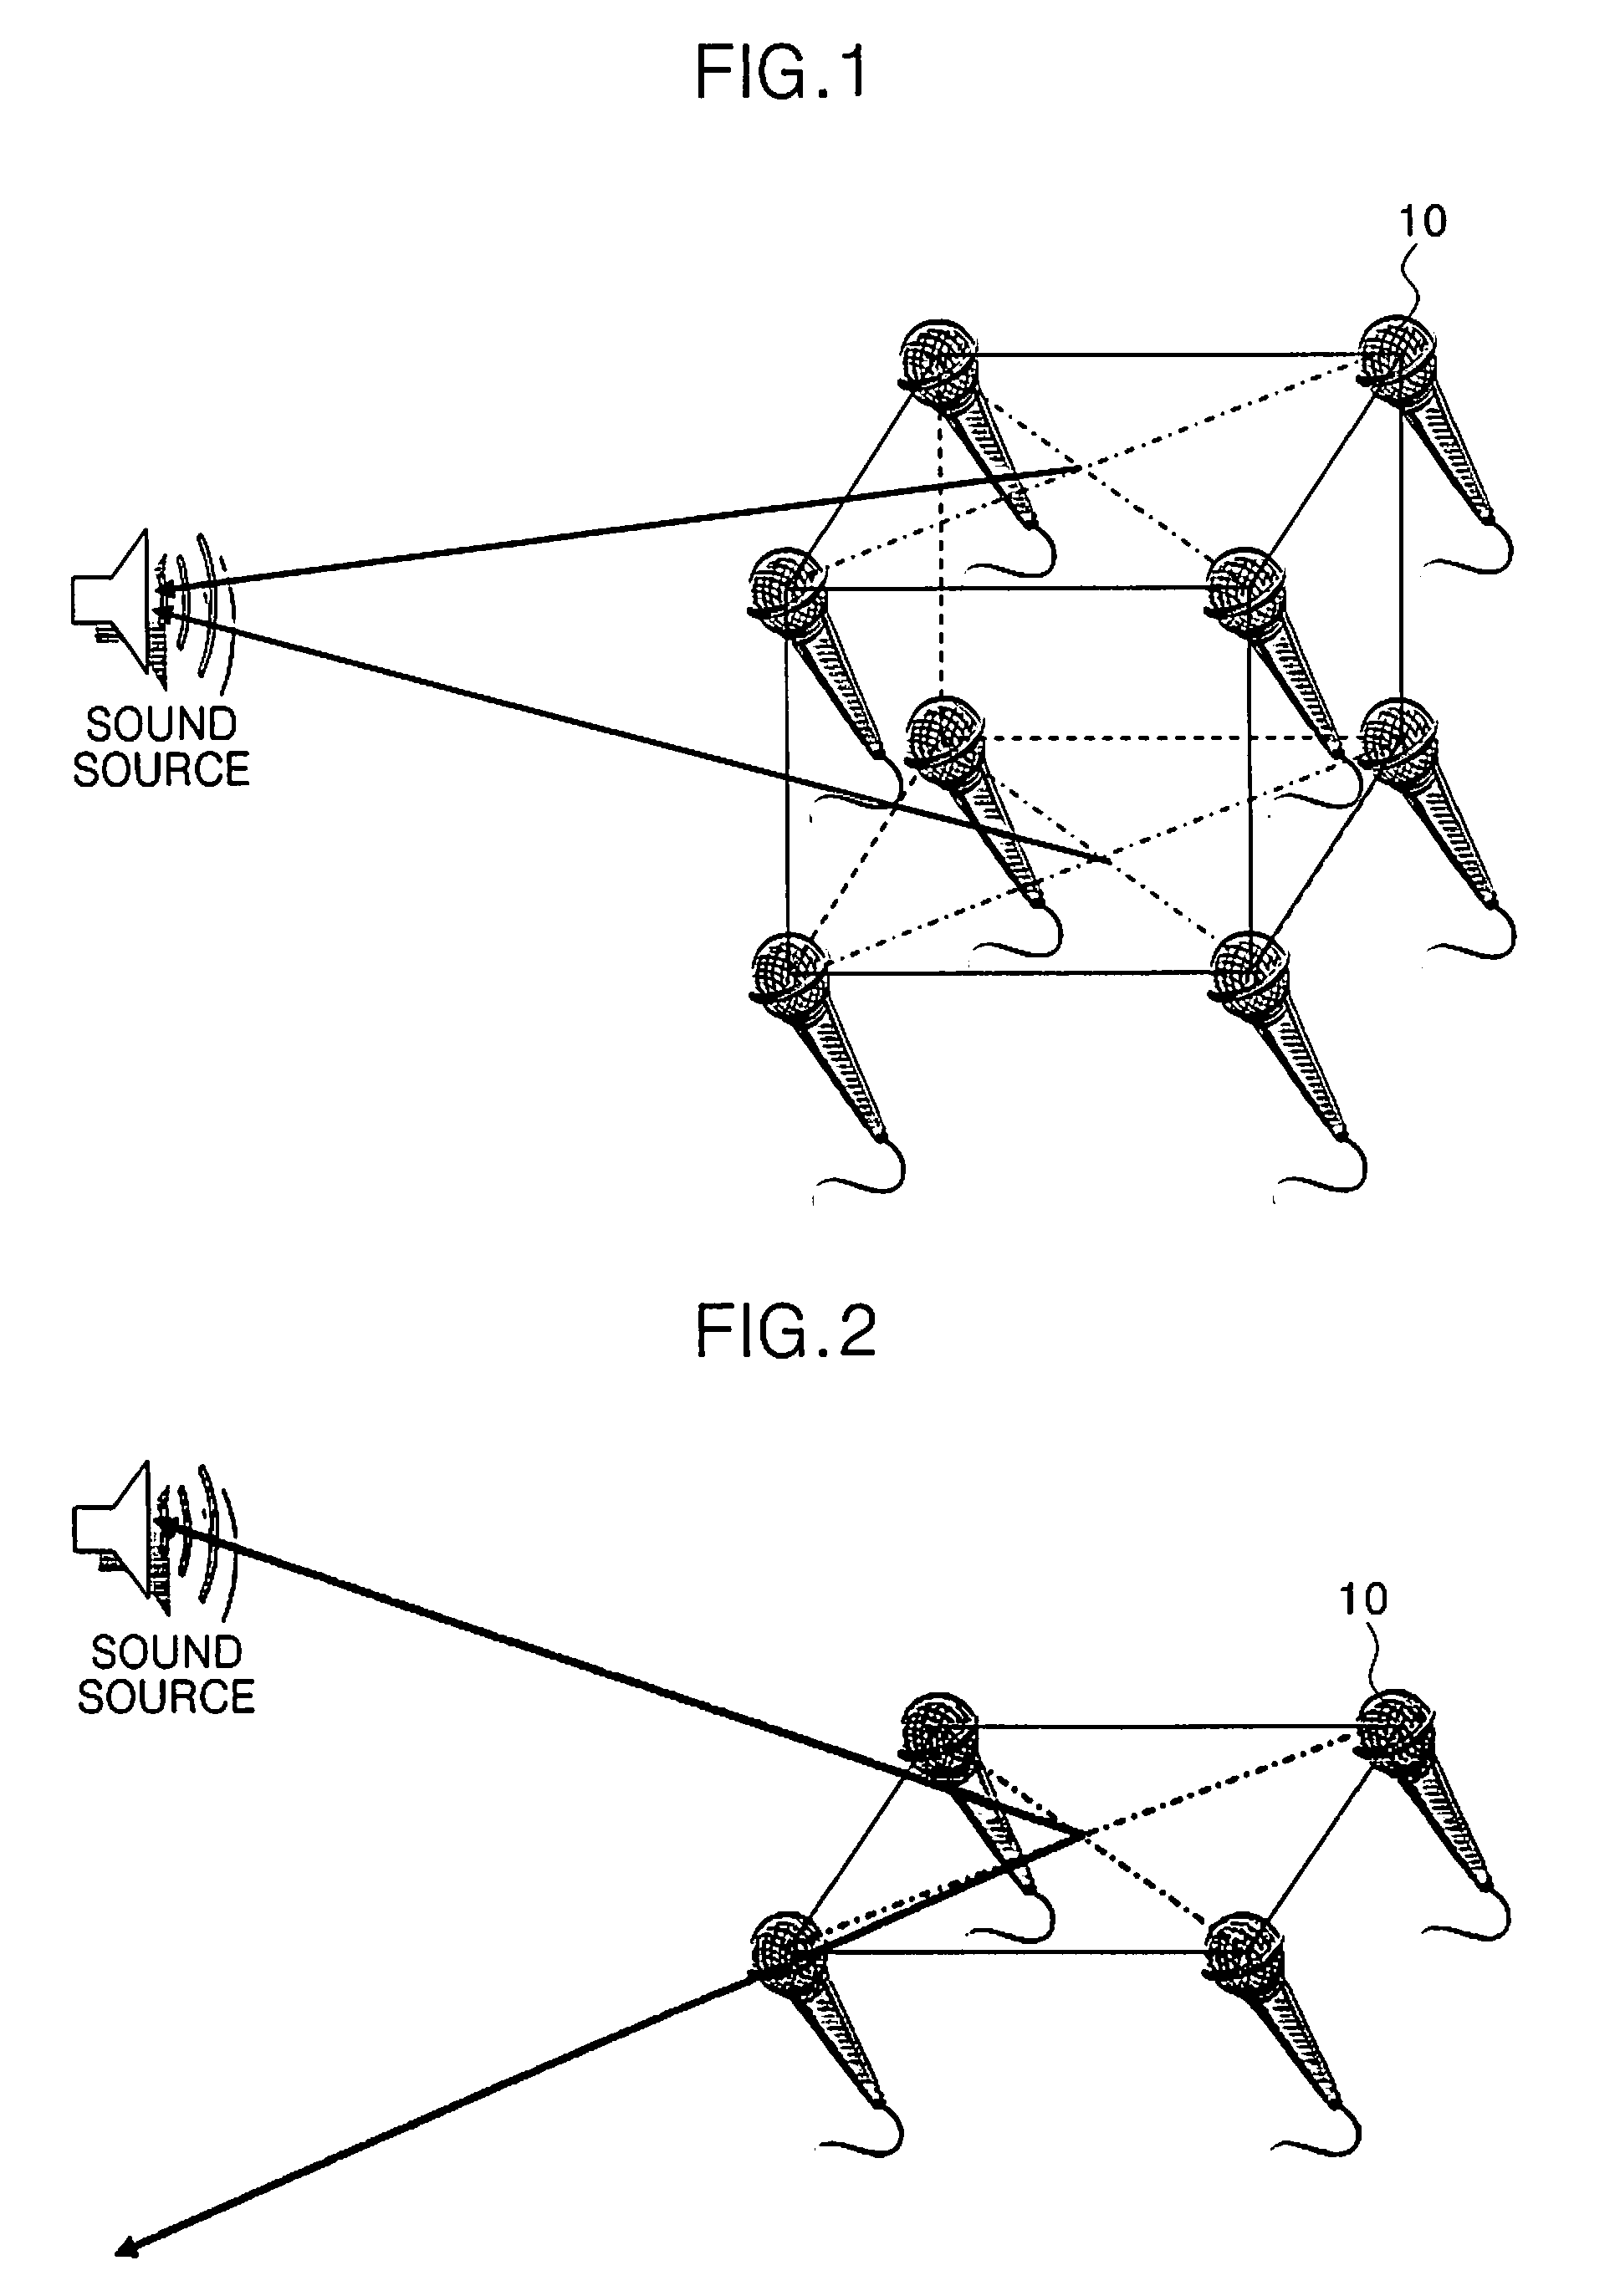 Apparatus and method for localizing sound source in robot